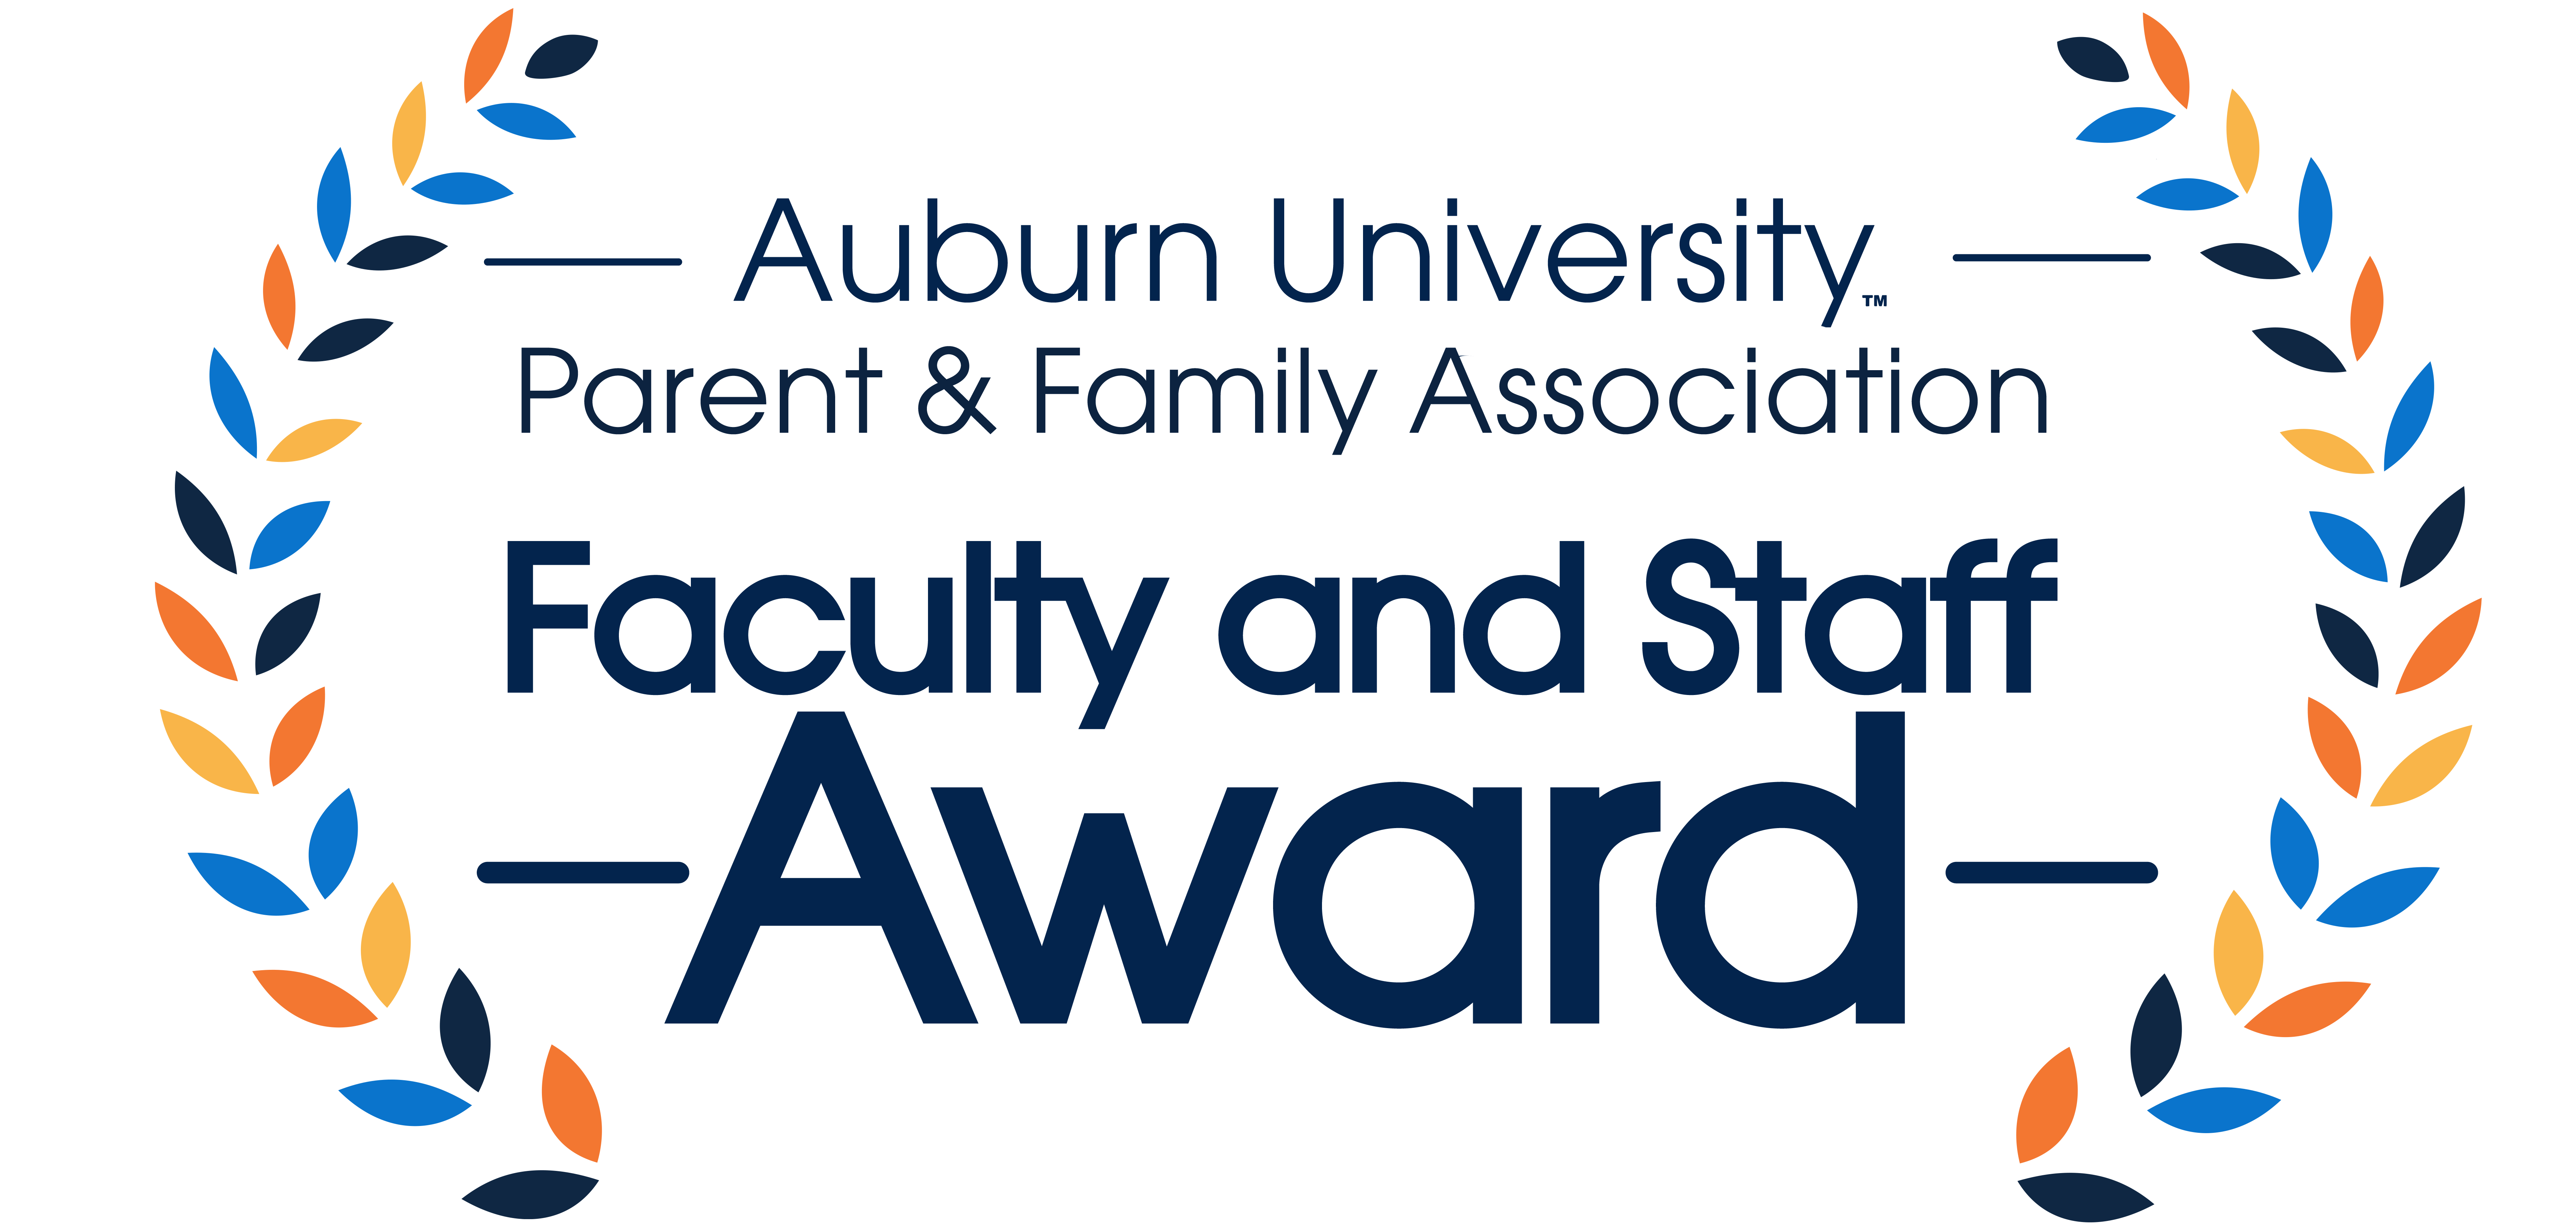 Parent & Family Association's Faculty and Staff Award Logo